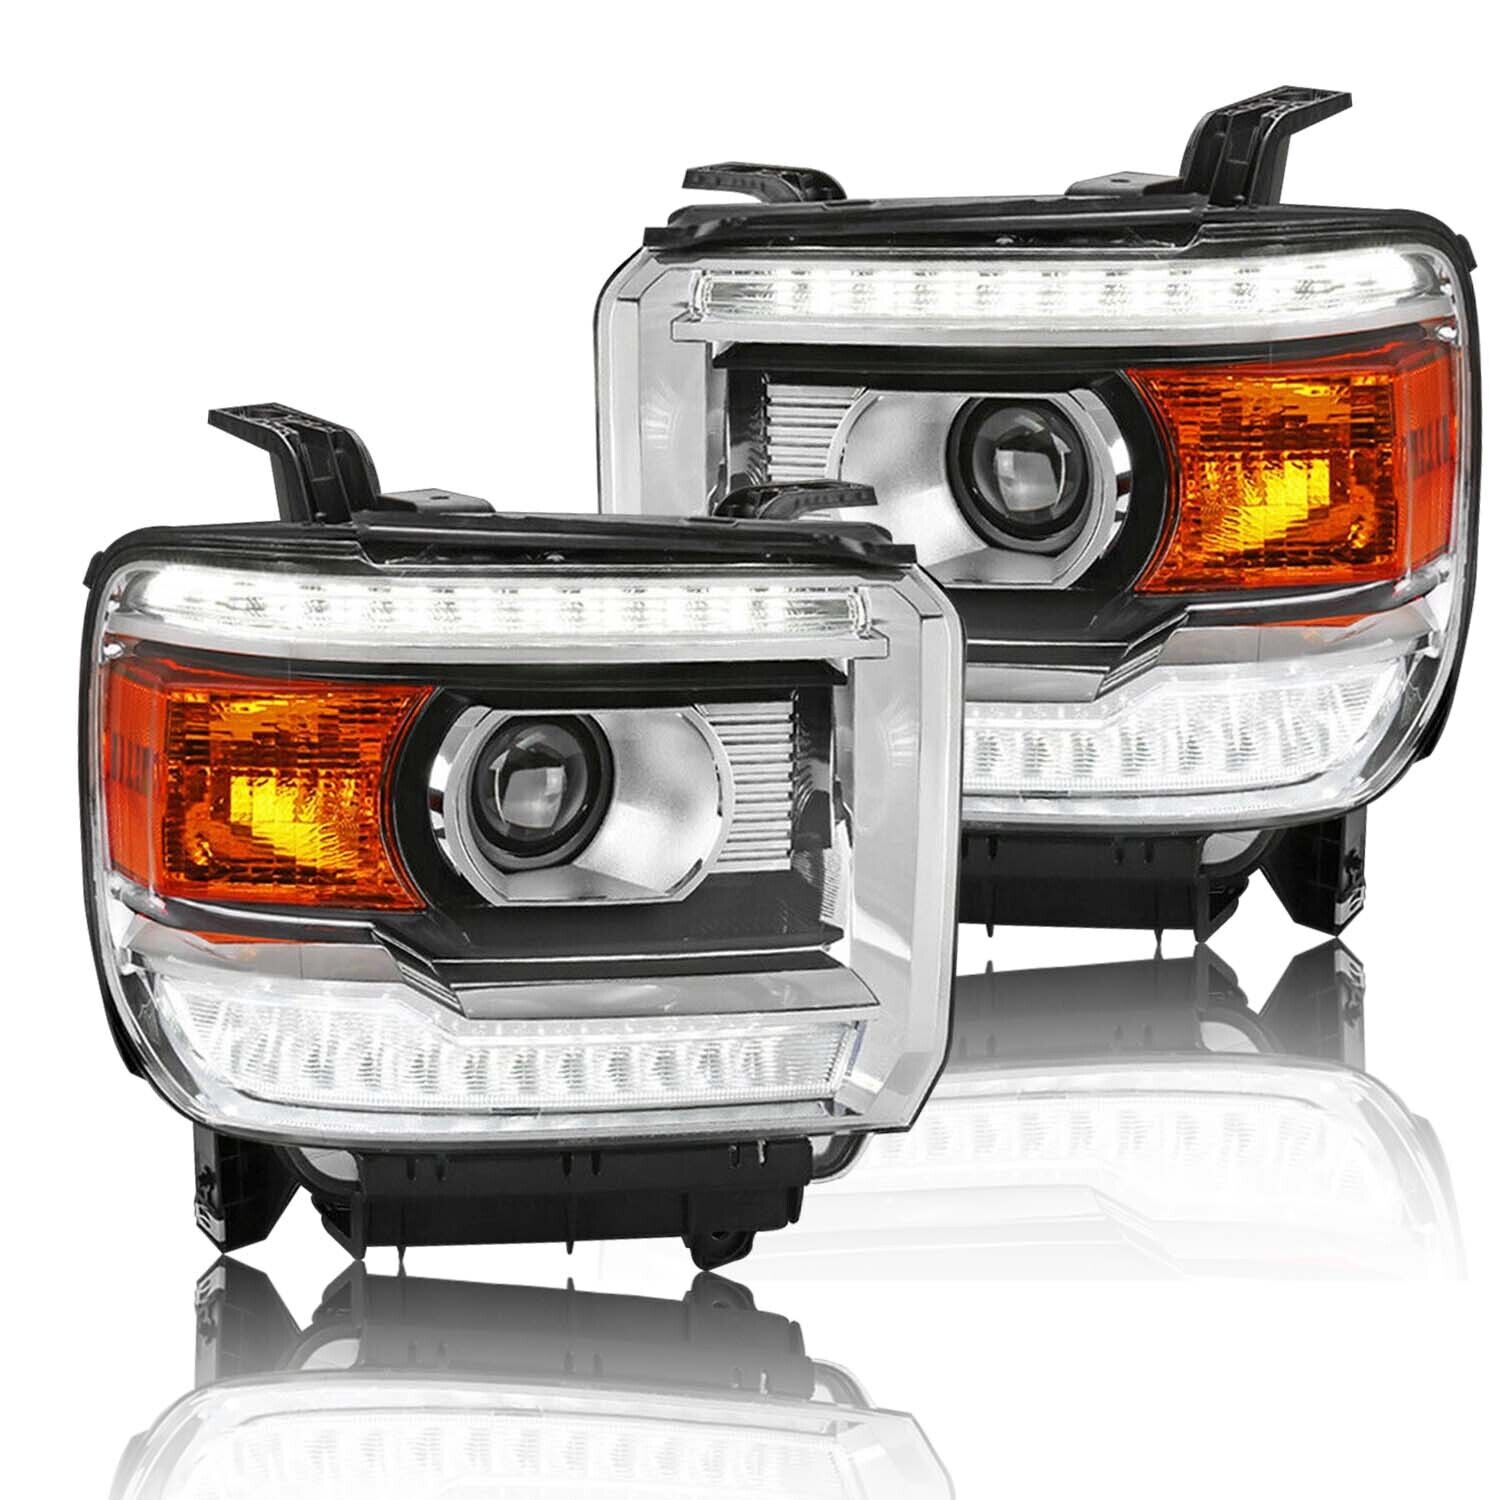 AUXITO LED DRL Headlights Projector For 14-18 GMC Sierra 1500 15-19 2500 3500HD